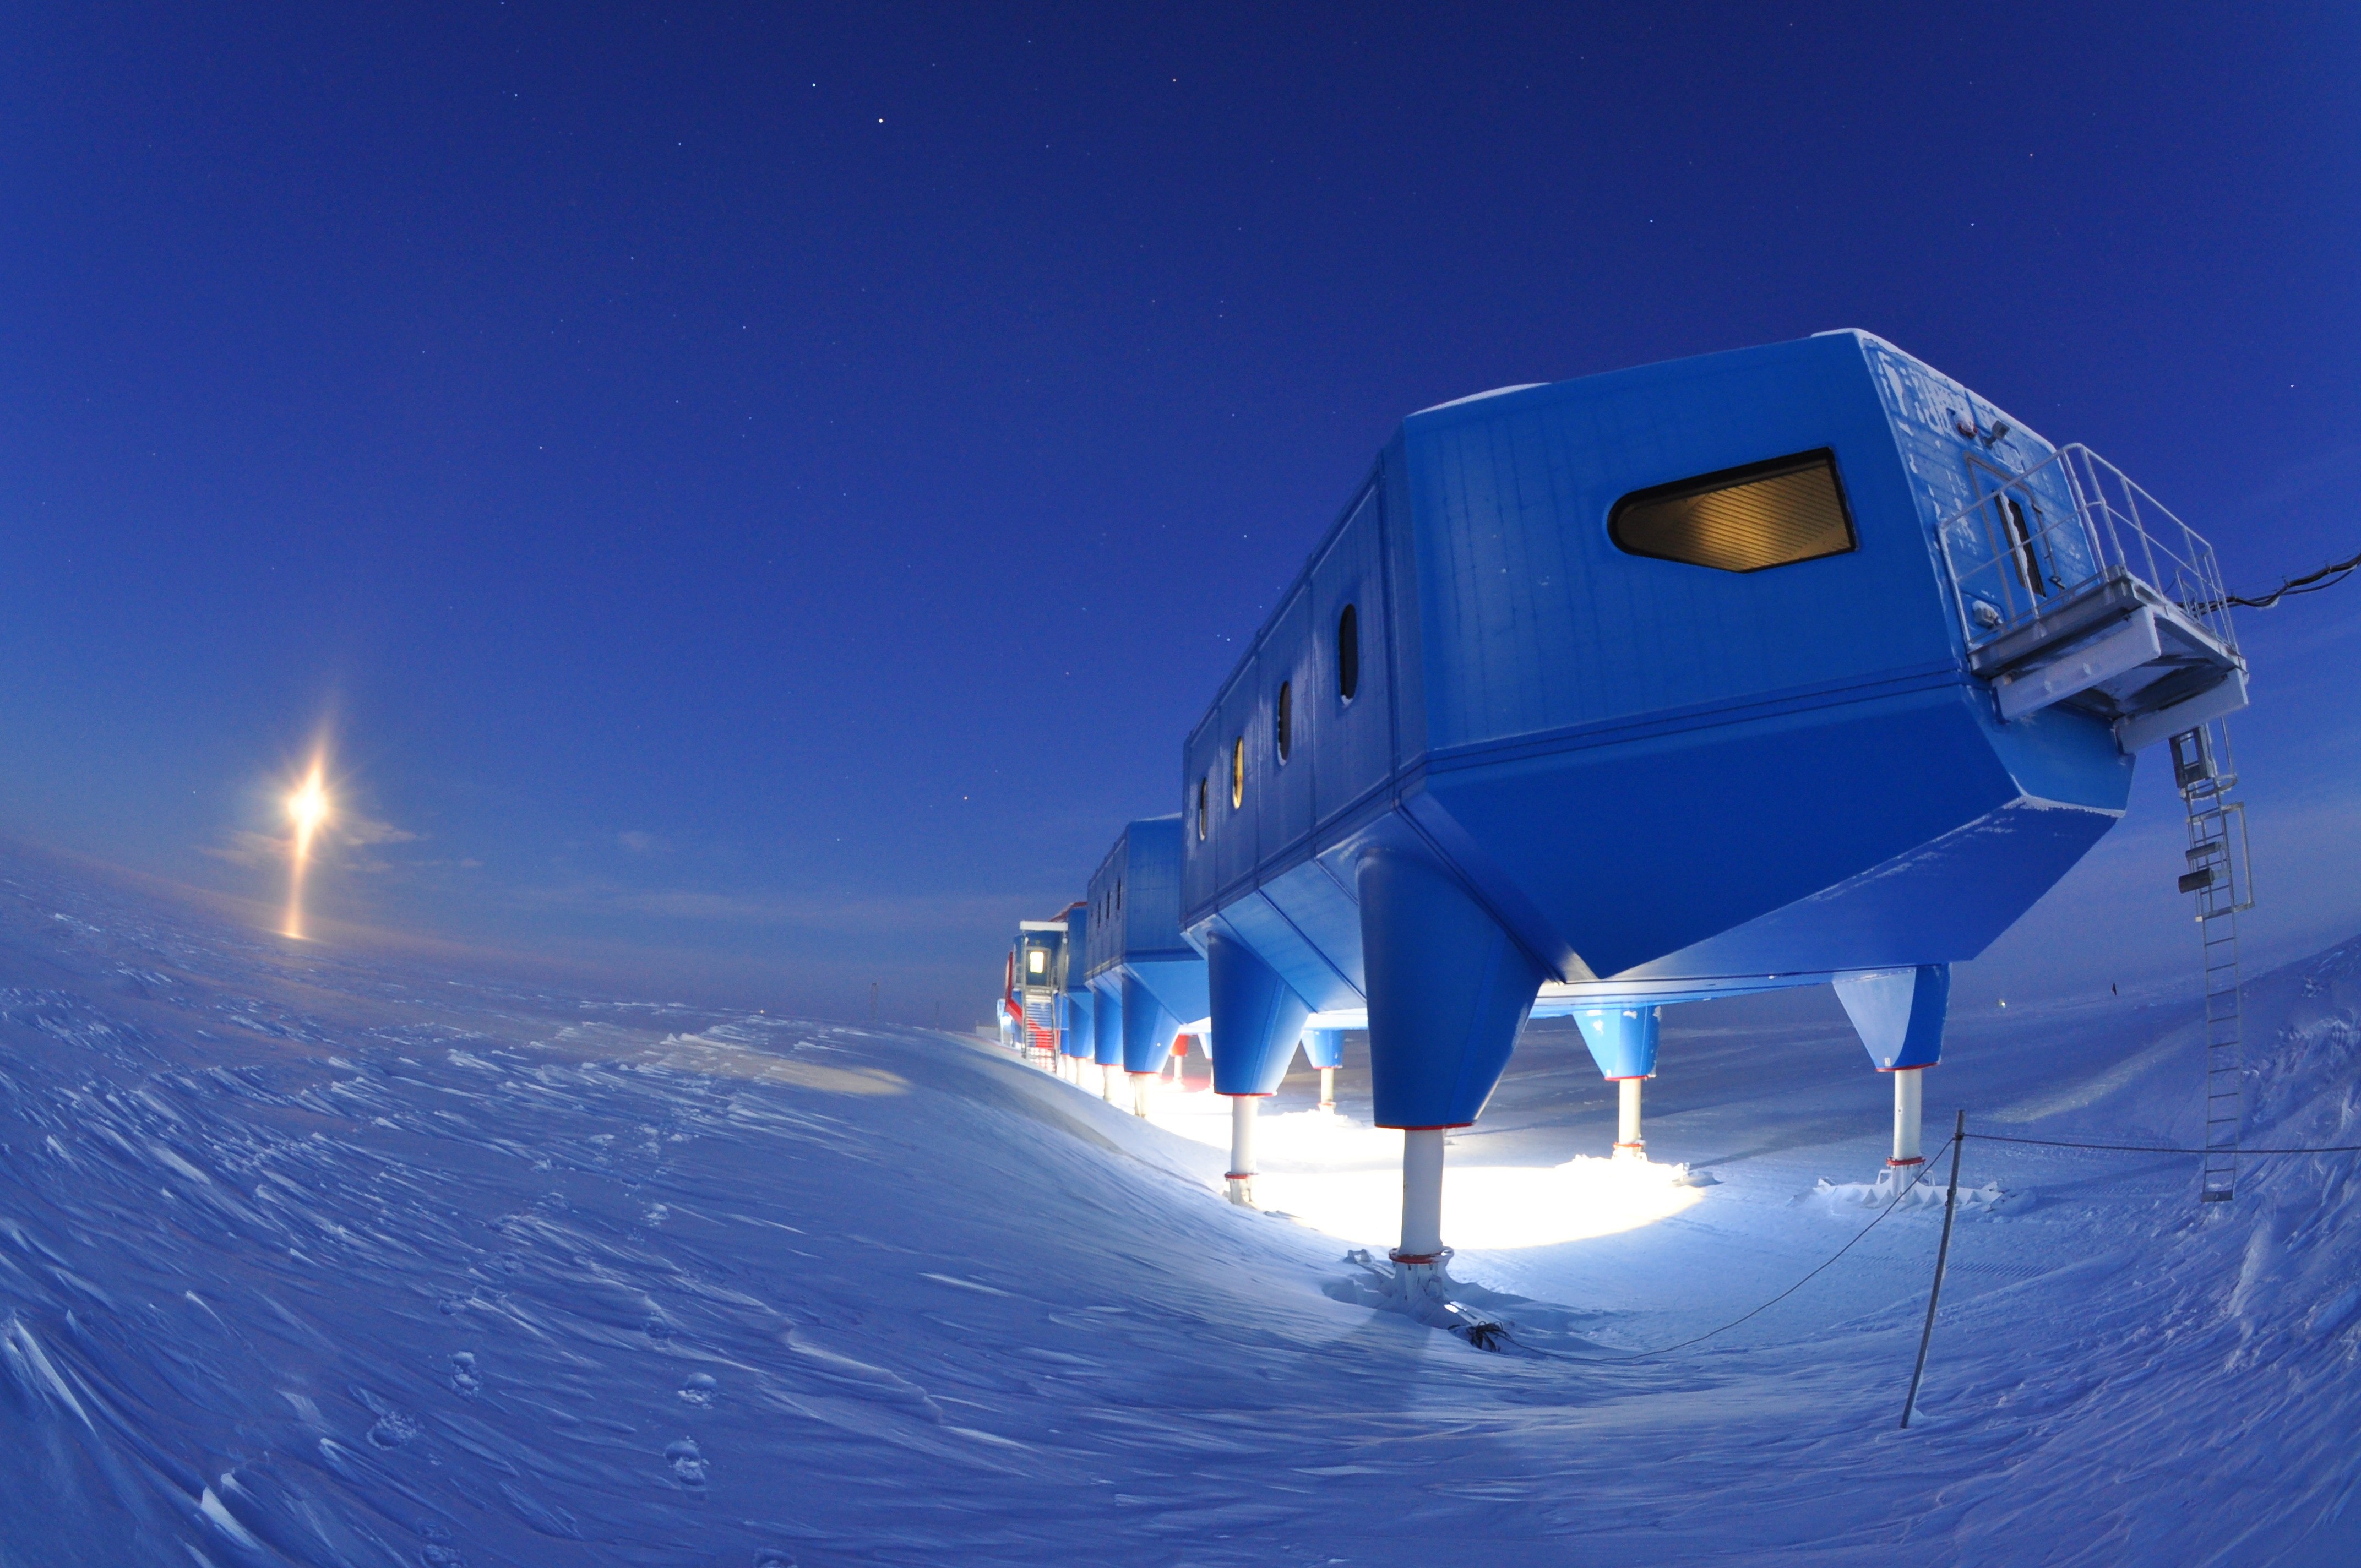 General 4288x2848 nature landscape Concordia Research Station Antarctica snow ice evening science technology laboratories building Moon moonlight clear sky fisheye lens lights low light